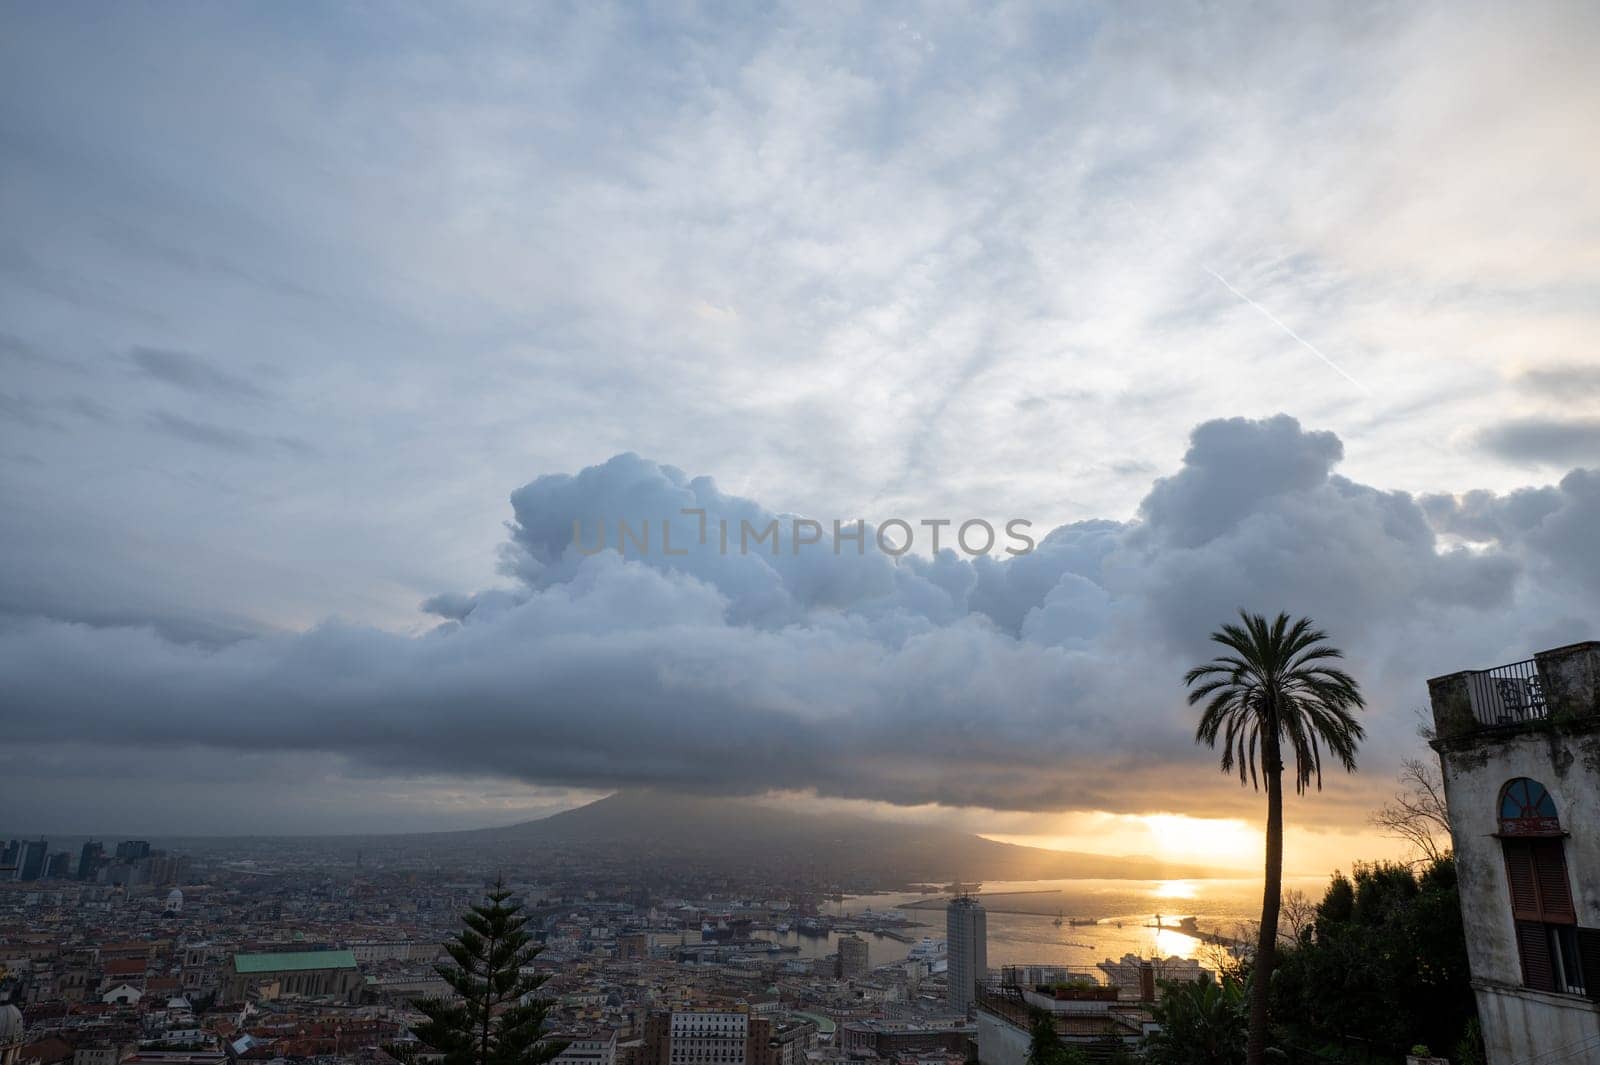 Cityscape of the city of Napoli in the morning with Vesuvius in the background by martinscphoto